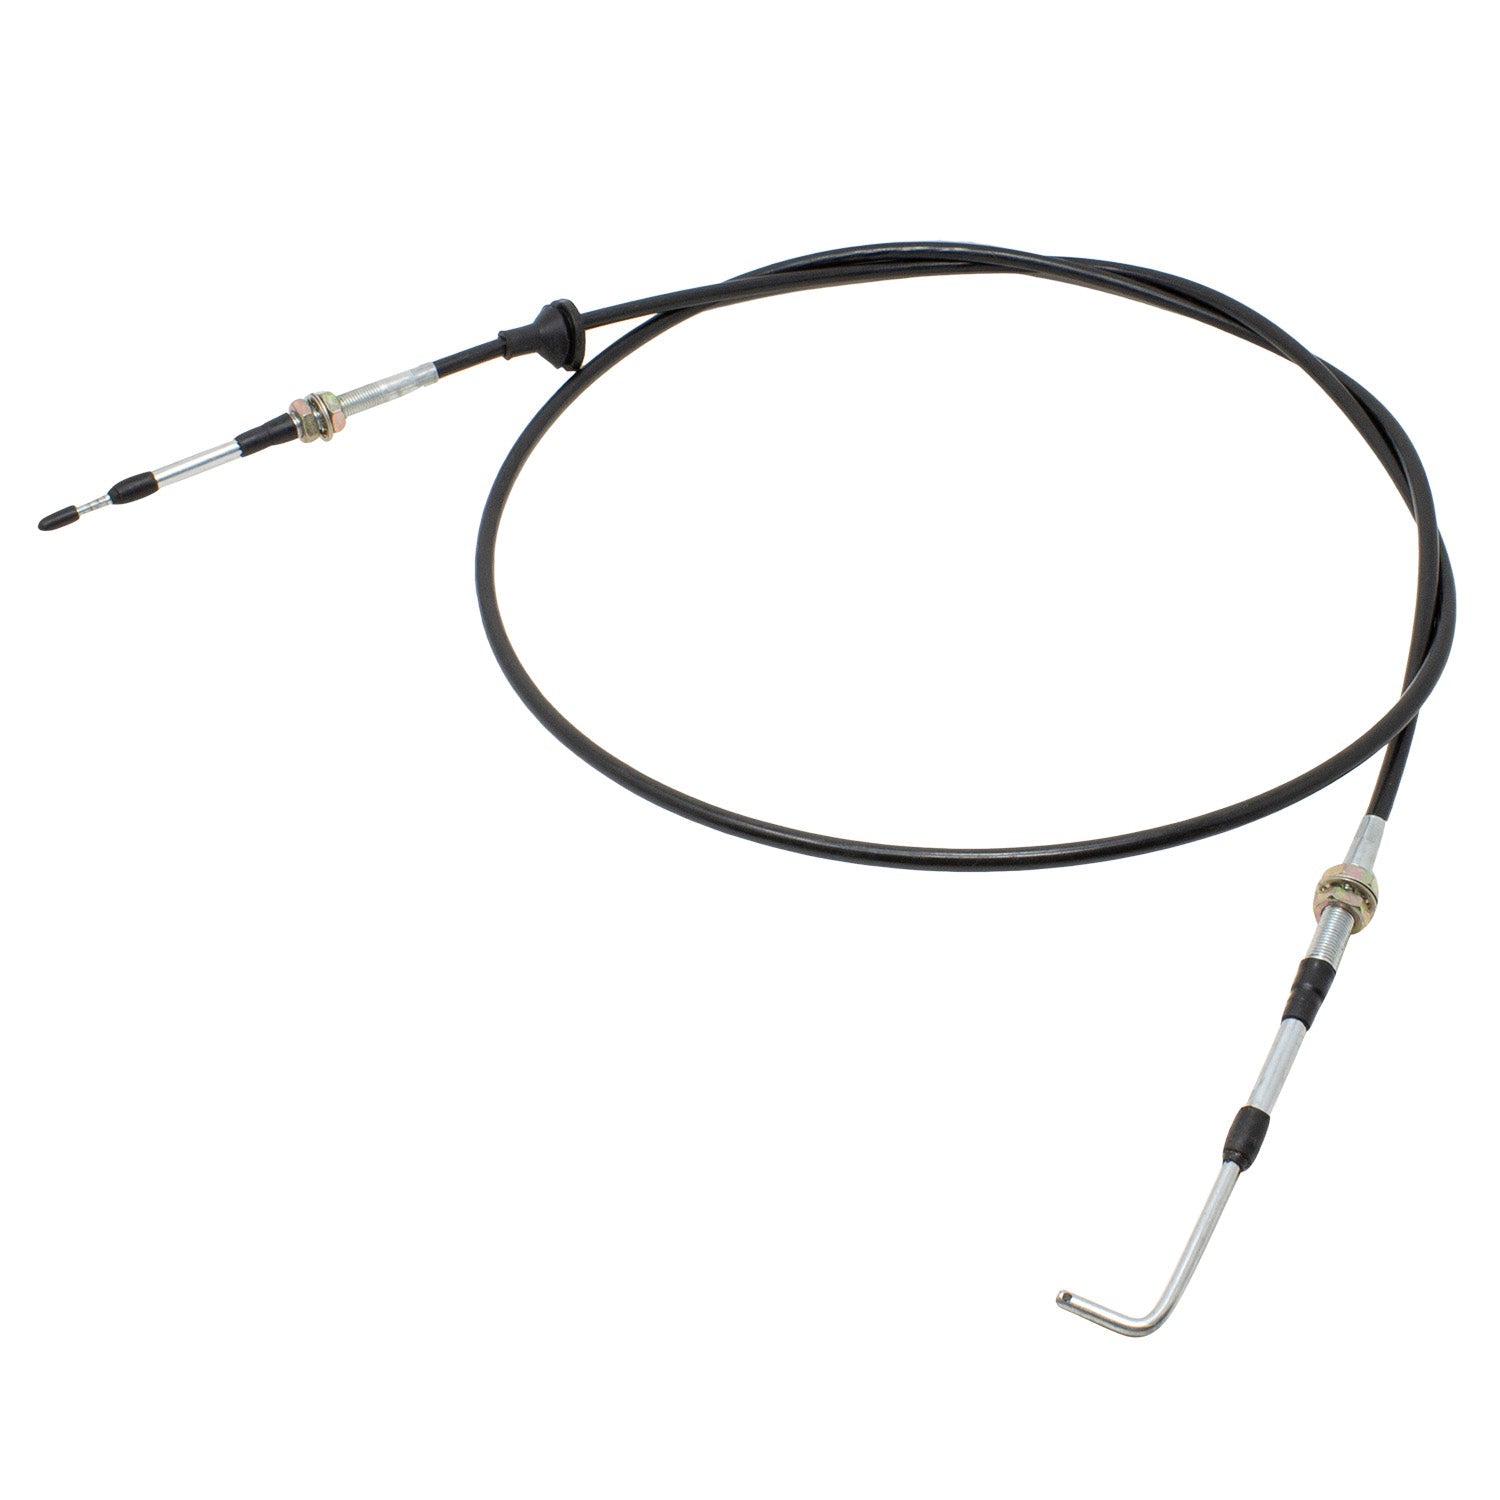 Duraforce 87340753, Throttle Cable For Case